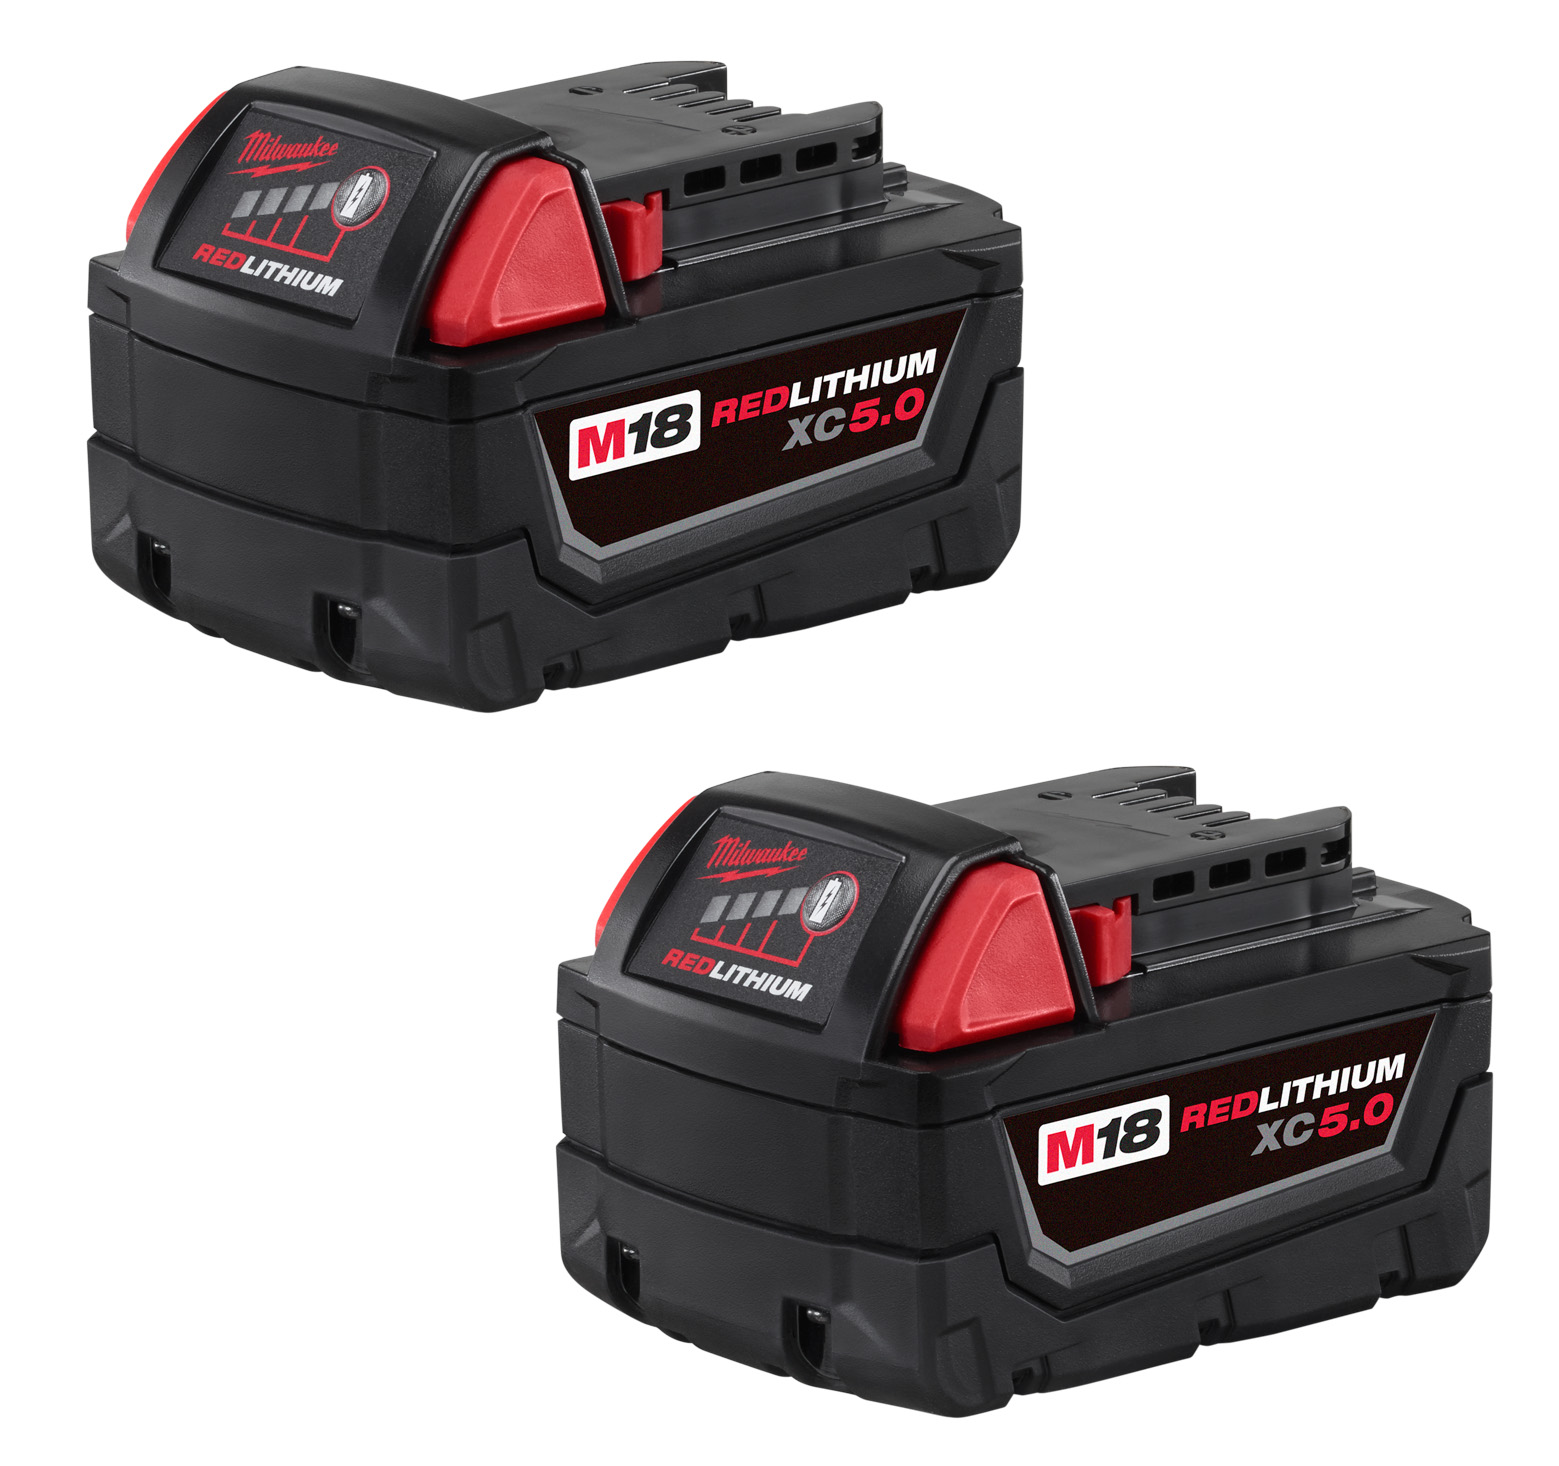 Delivers up to 2.5X more run-time than standard lithium. Provides more delivered energy than any 18 V pack on the market. Delivers up to 20% more power than standard lithium. Faster application speed & increased application range. Provides more work over the life of the pack than any 18 V pack on the market. REDLITHIUM™ Protection prevents pack failure from vibration or drops, routes water away from critical components and out of the pack, minimizes heat to extend run-time & life, operates below -18C/0F. Forward and backward compatible with 60+ M18™ tools.